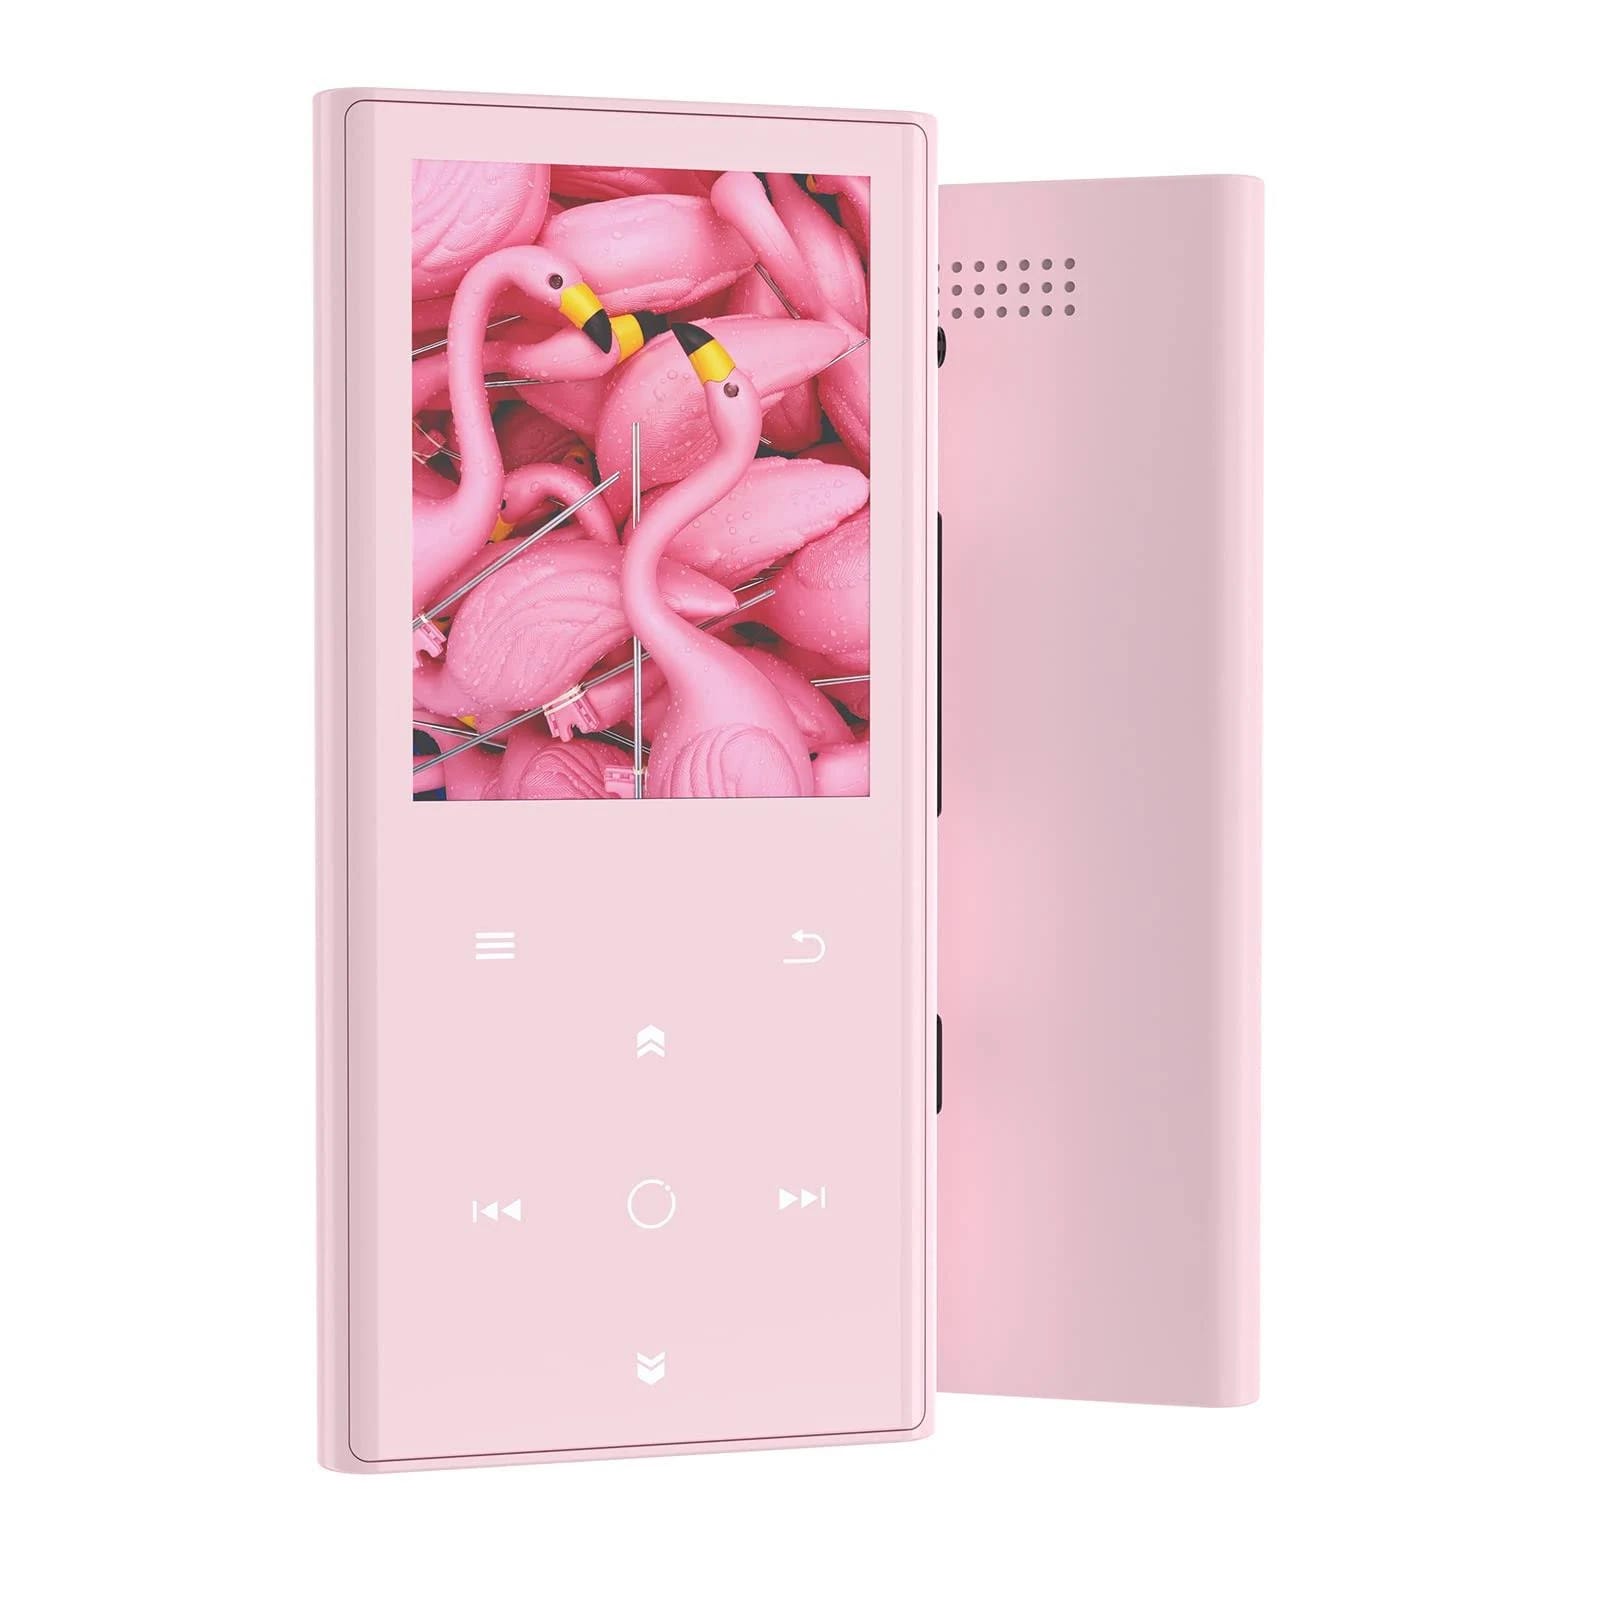 High-Quality 64GB Bluetooth MP3 Player with Speaker and FM Radio | Image